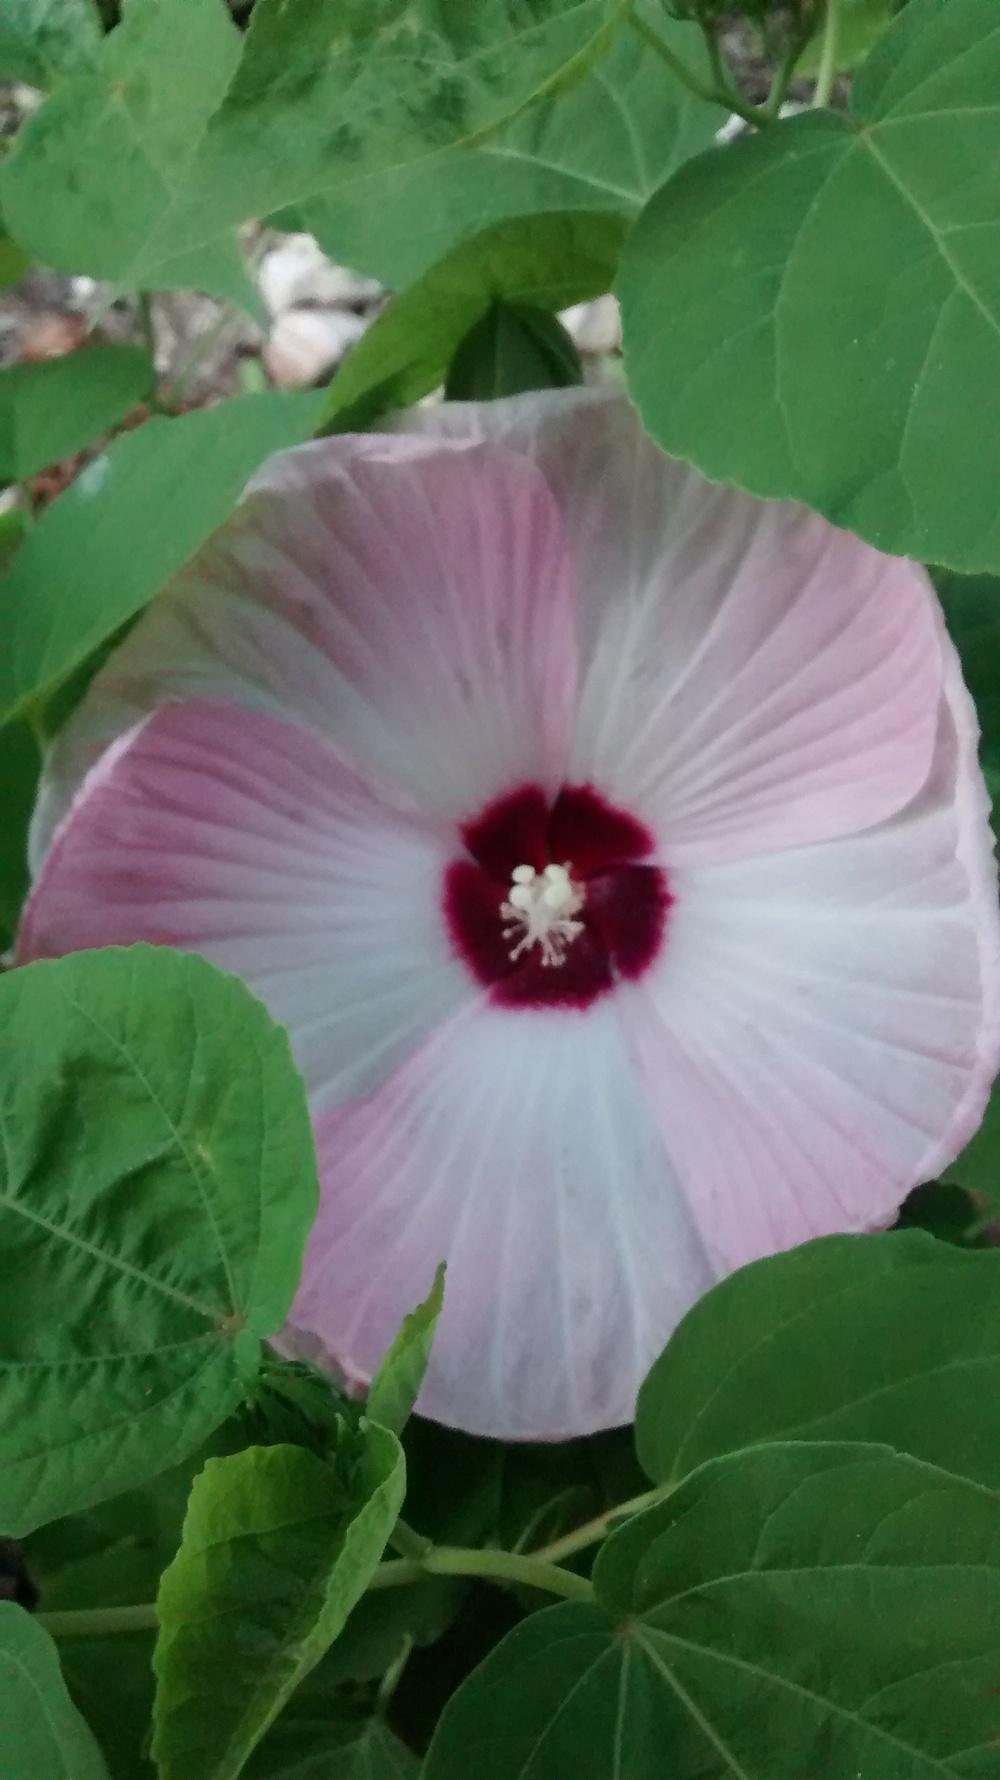 Photo of Hybrid Hardy Hibiscus (Hibiscus Luna™ Pink Swirl) uploaded by DraDiana